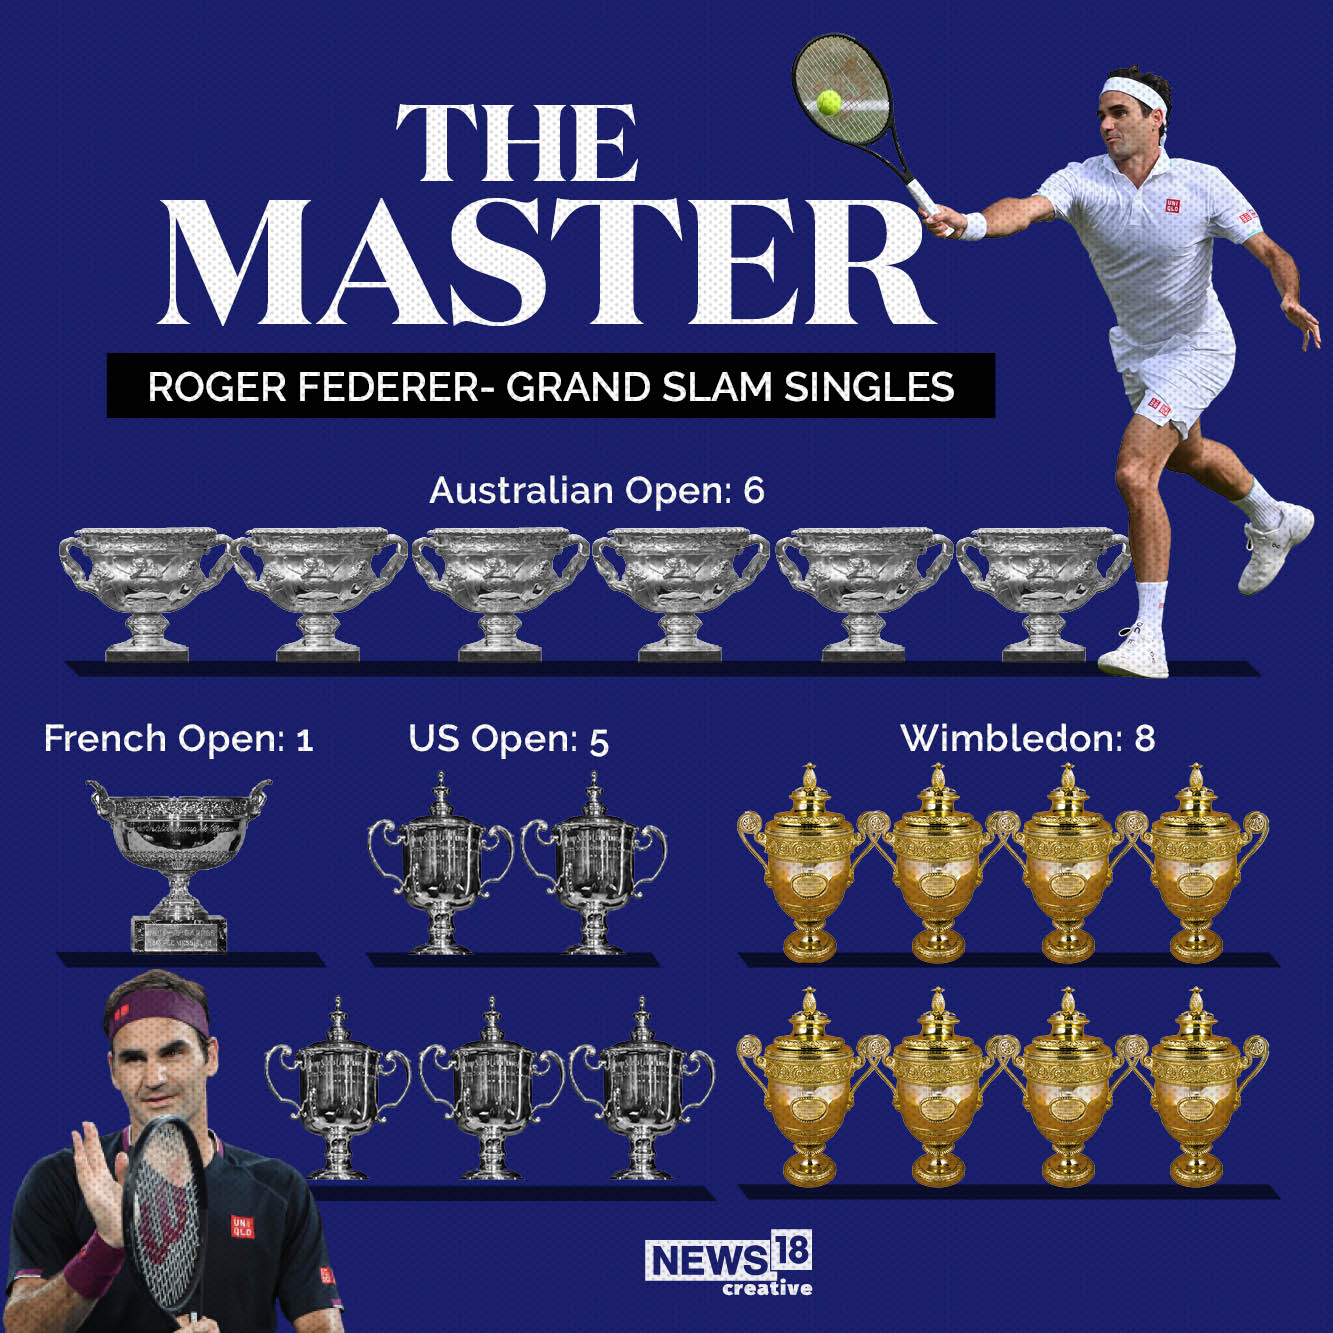 Roger Federer: The legend's journey on the tennis court in numbers